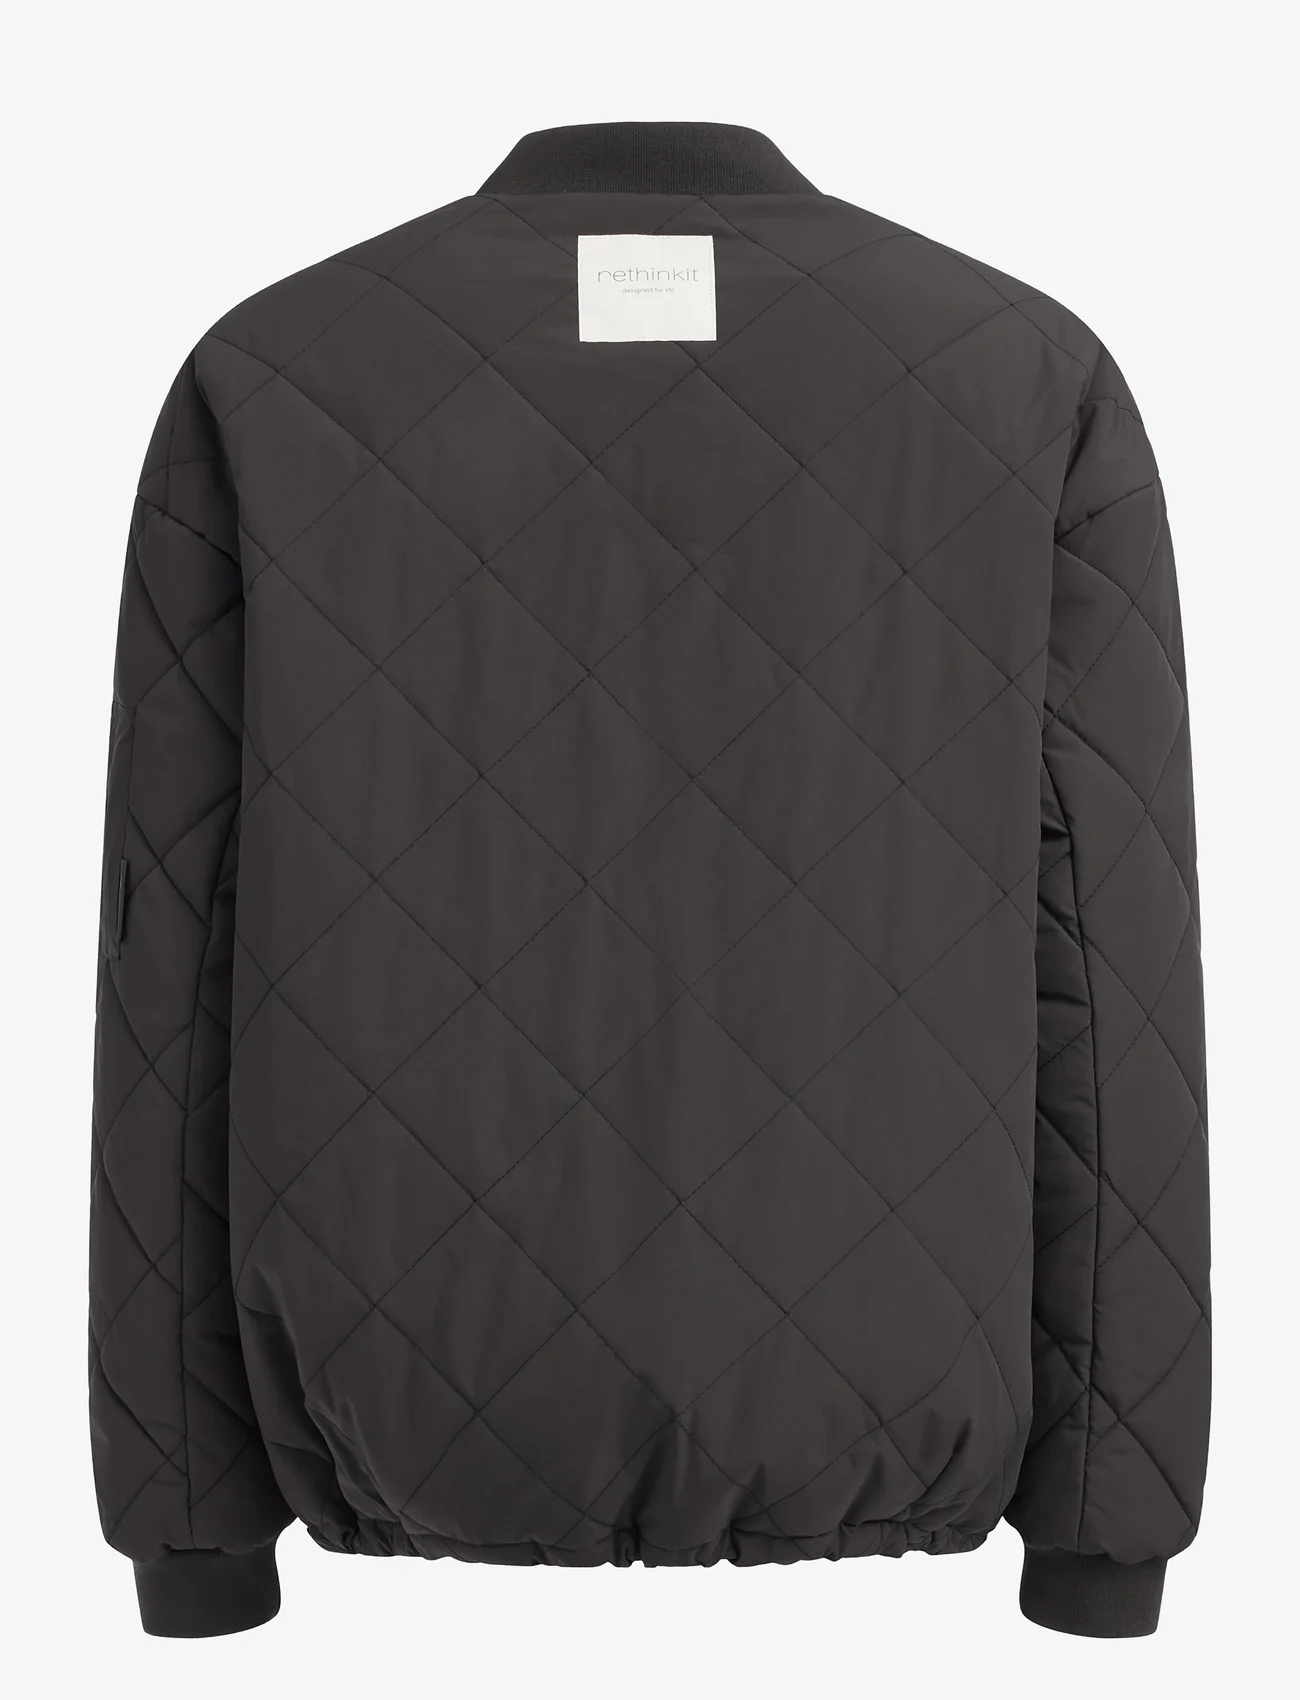 Rethinkit - Quilted Bomber Jacket Latté - light jackets - almost black - 1